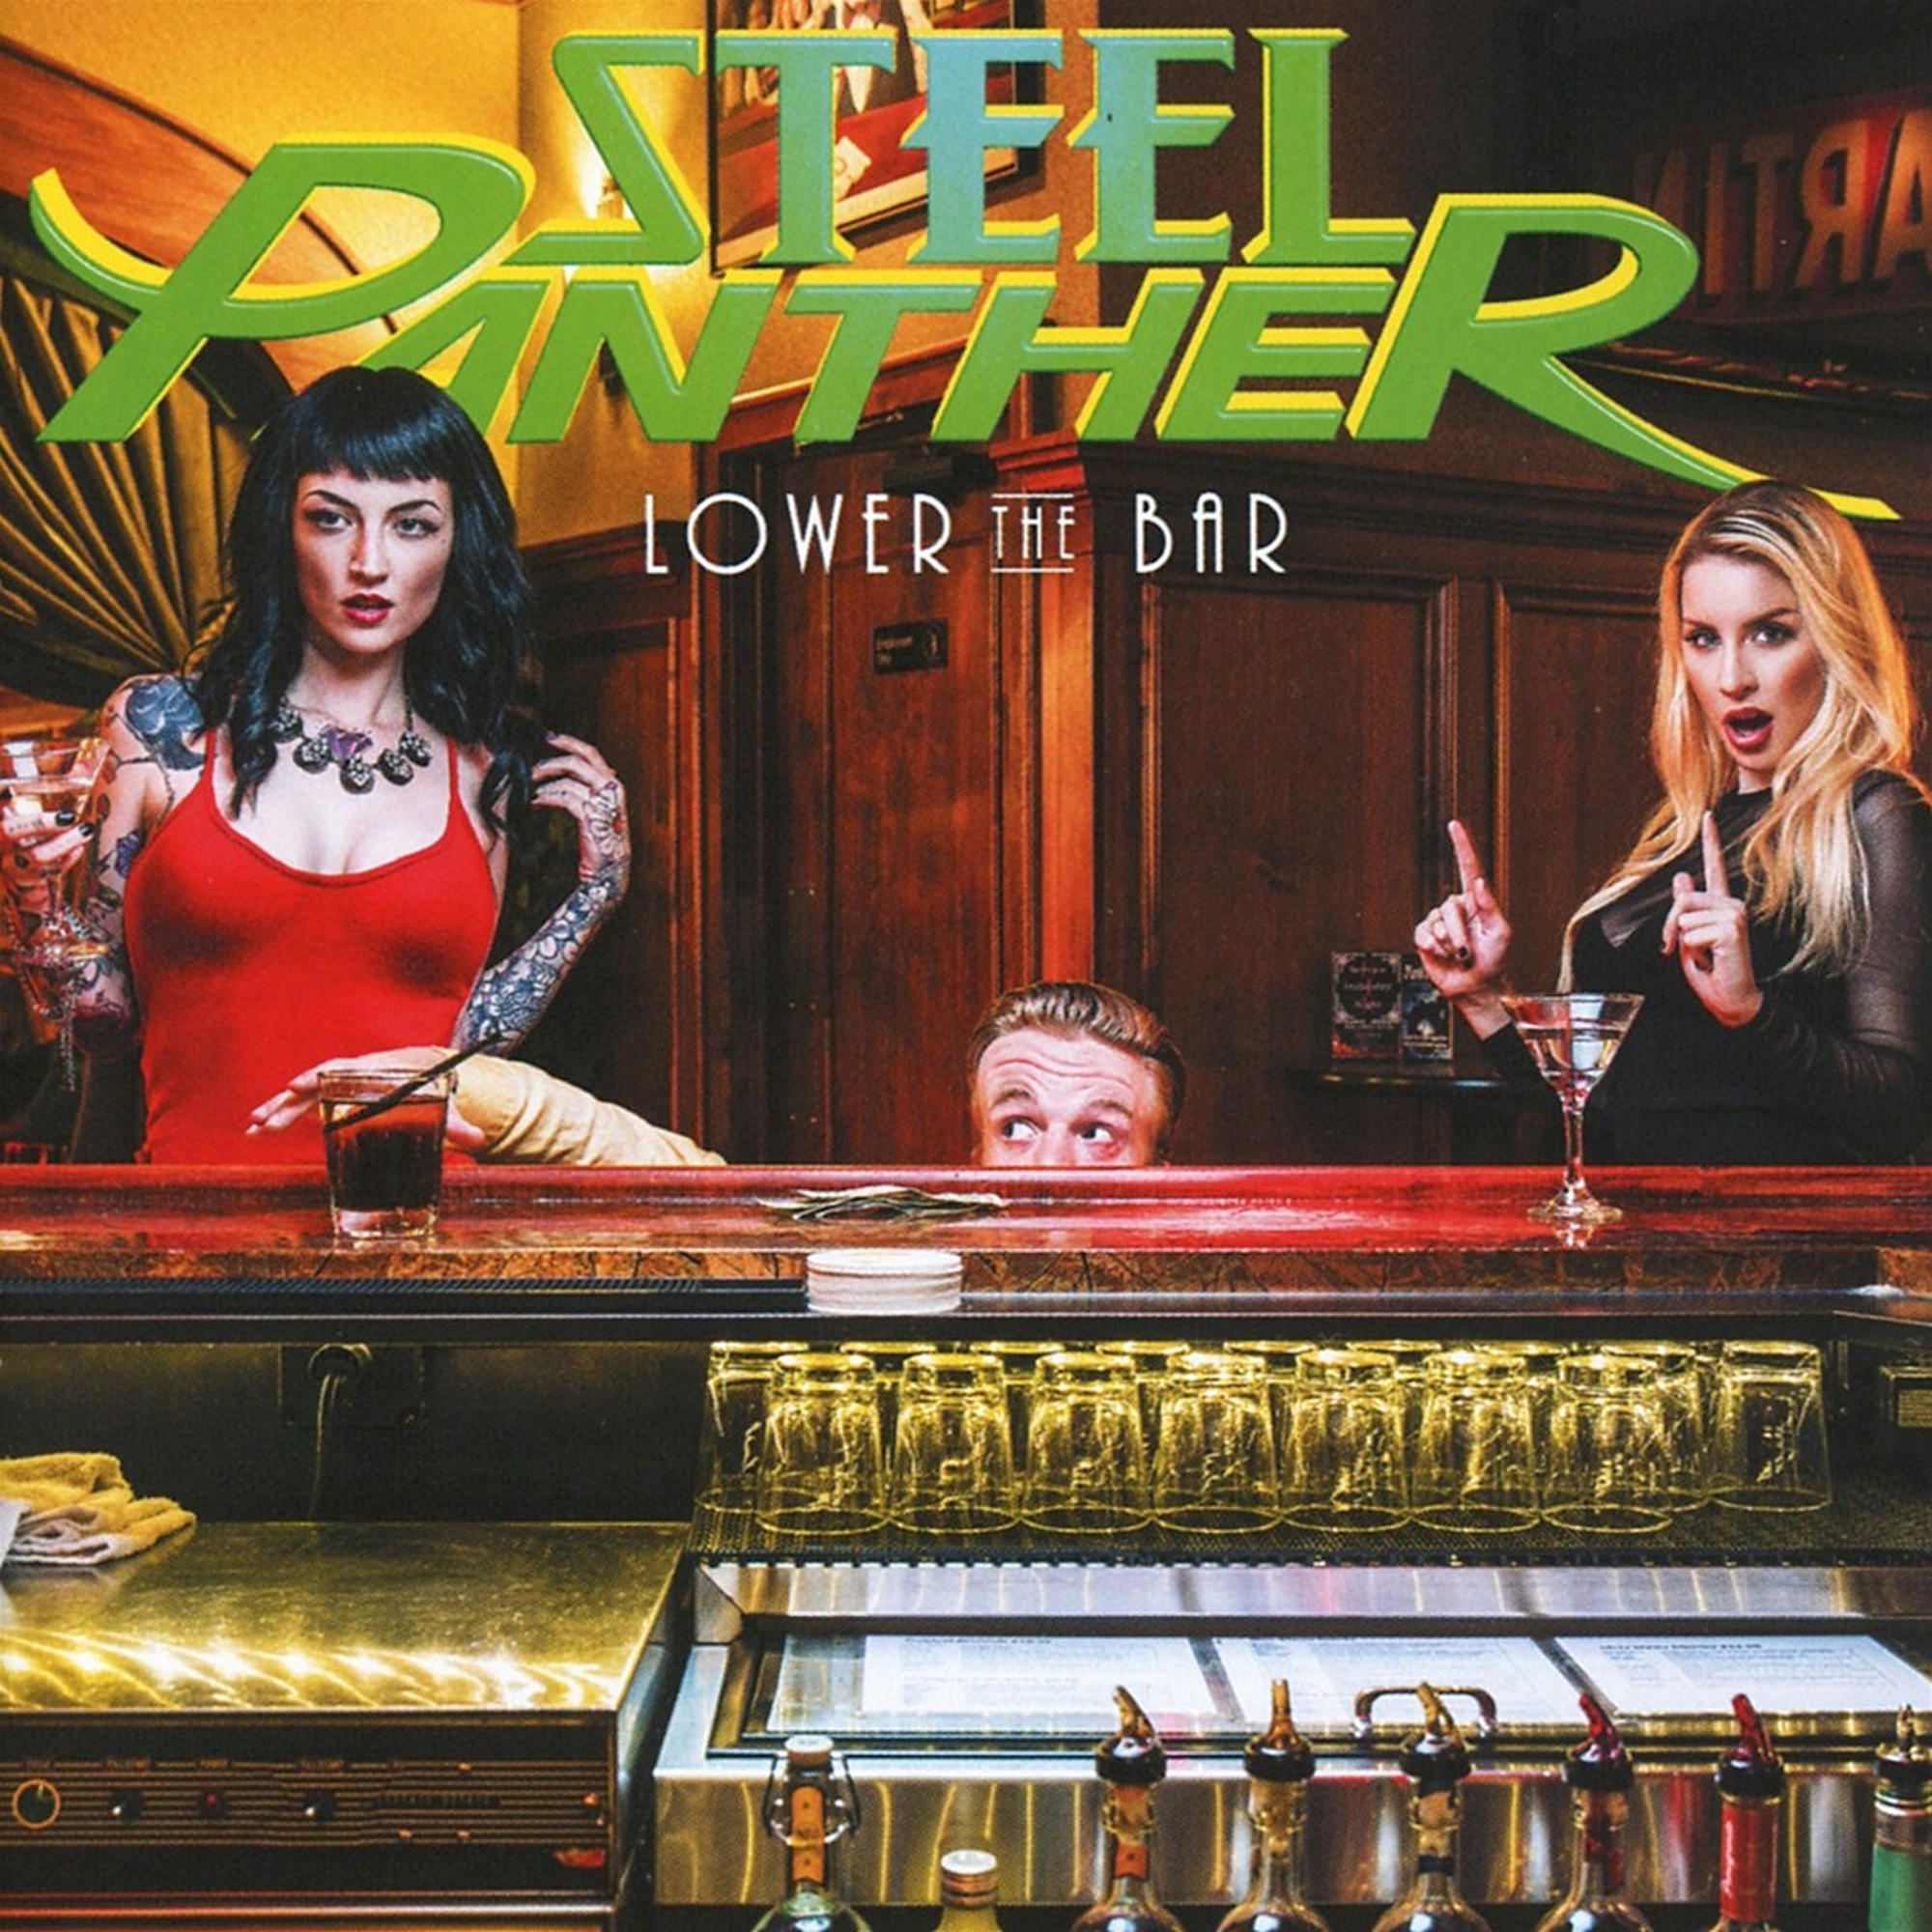 Steel Panther - LOWER EDITION) THE BAR (CD) (DELUXE 